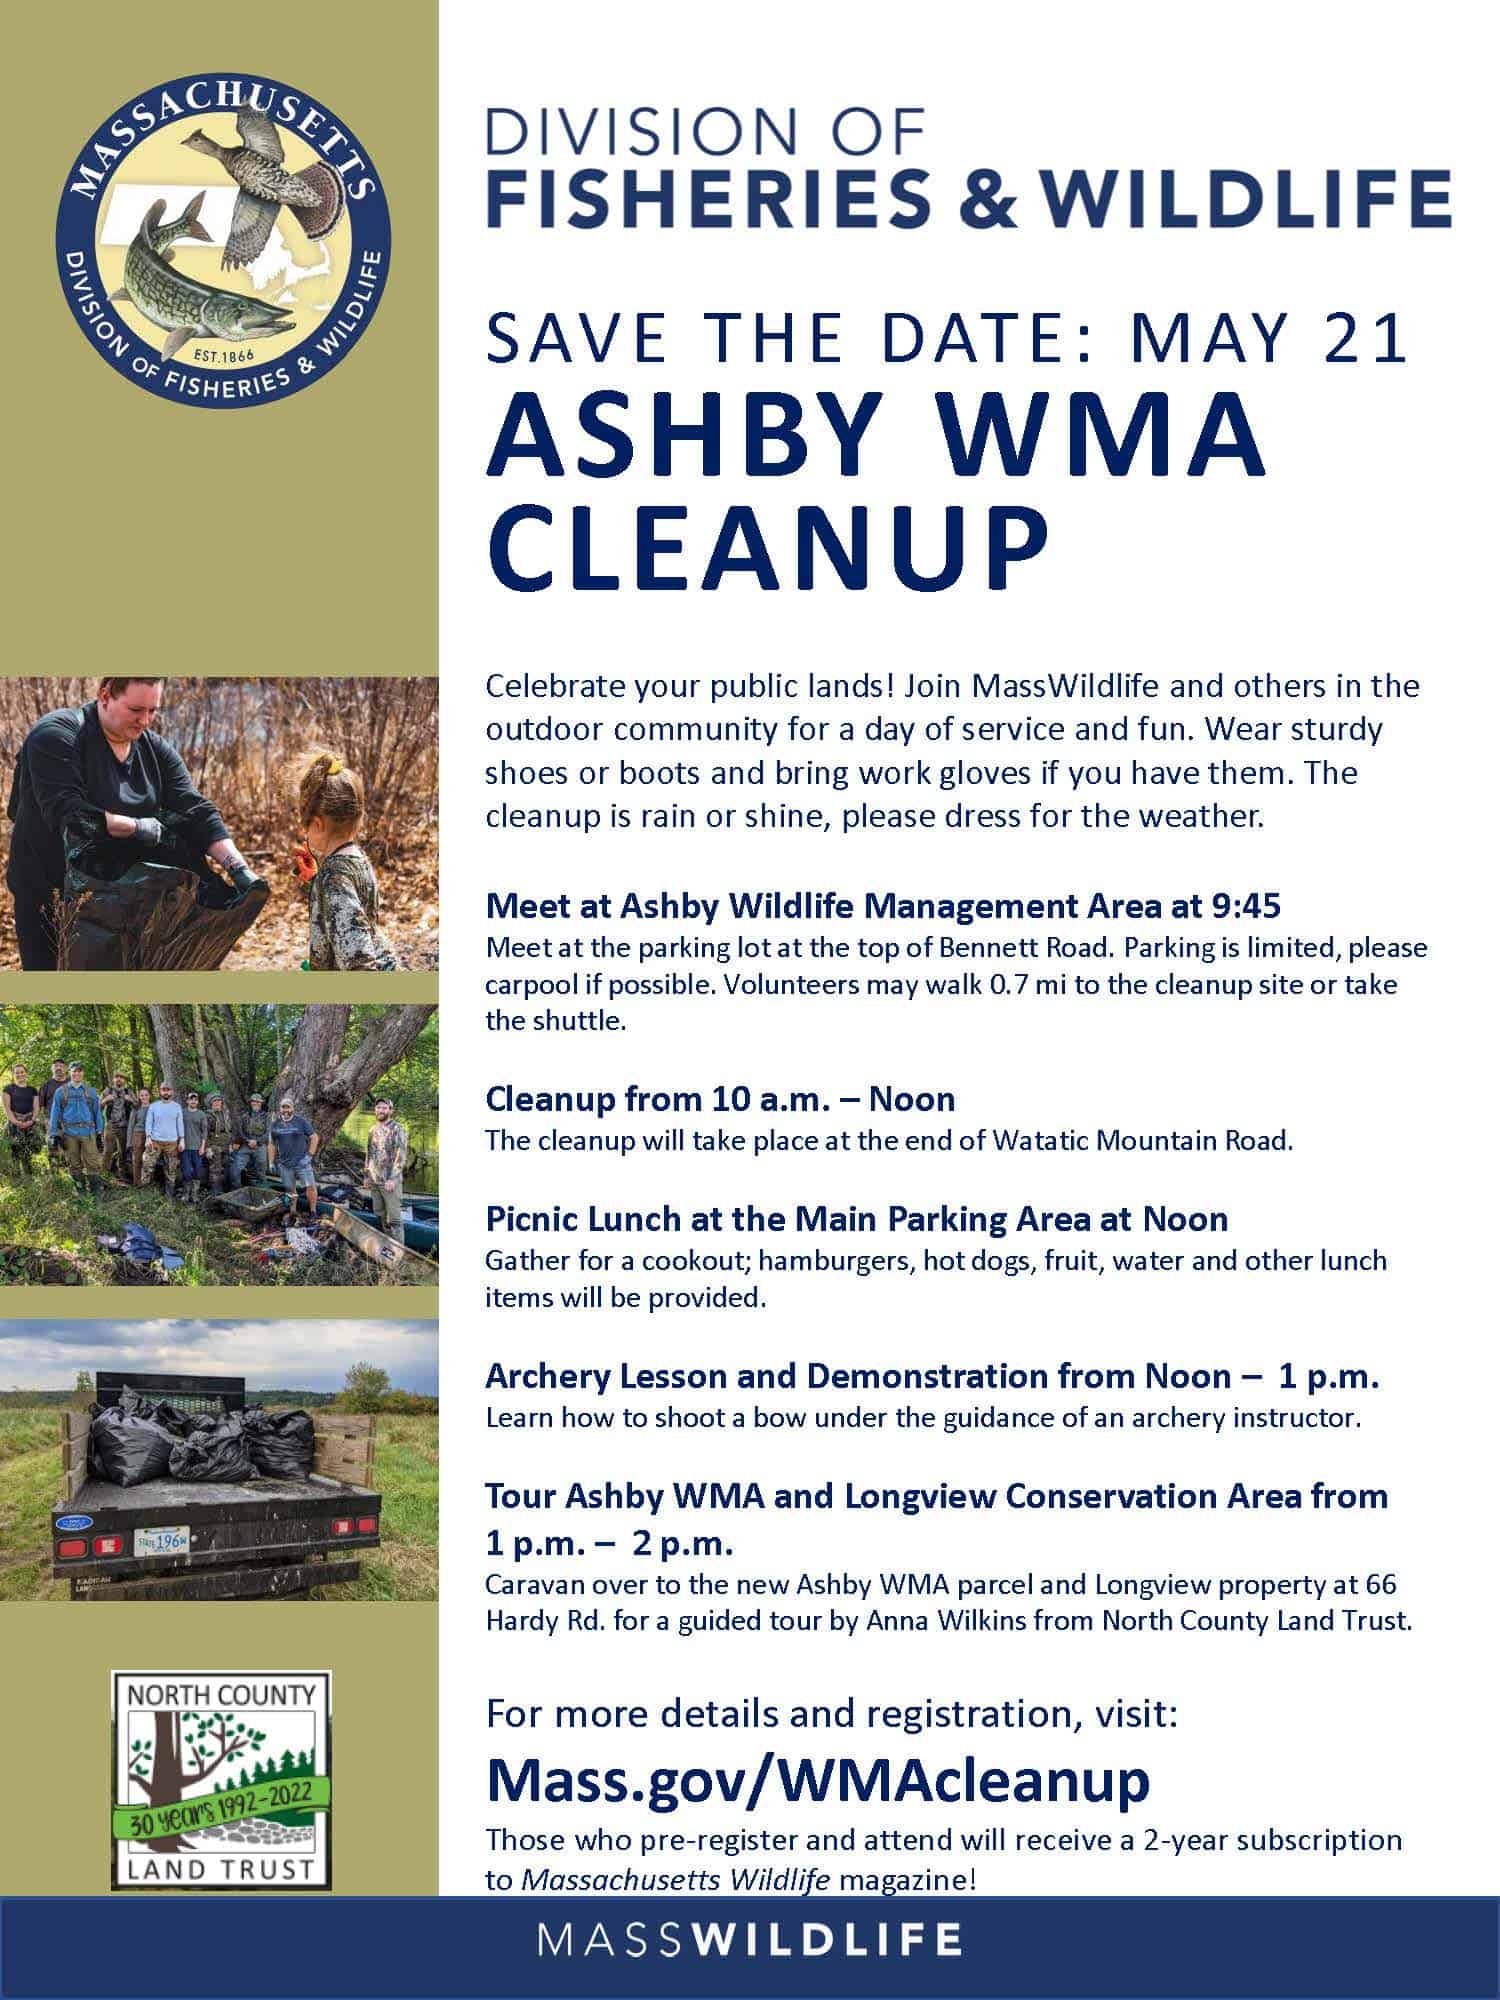 Ashby WMA Cleanup - Partner Event with MA Fisheries and Wildlife